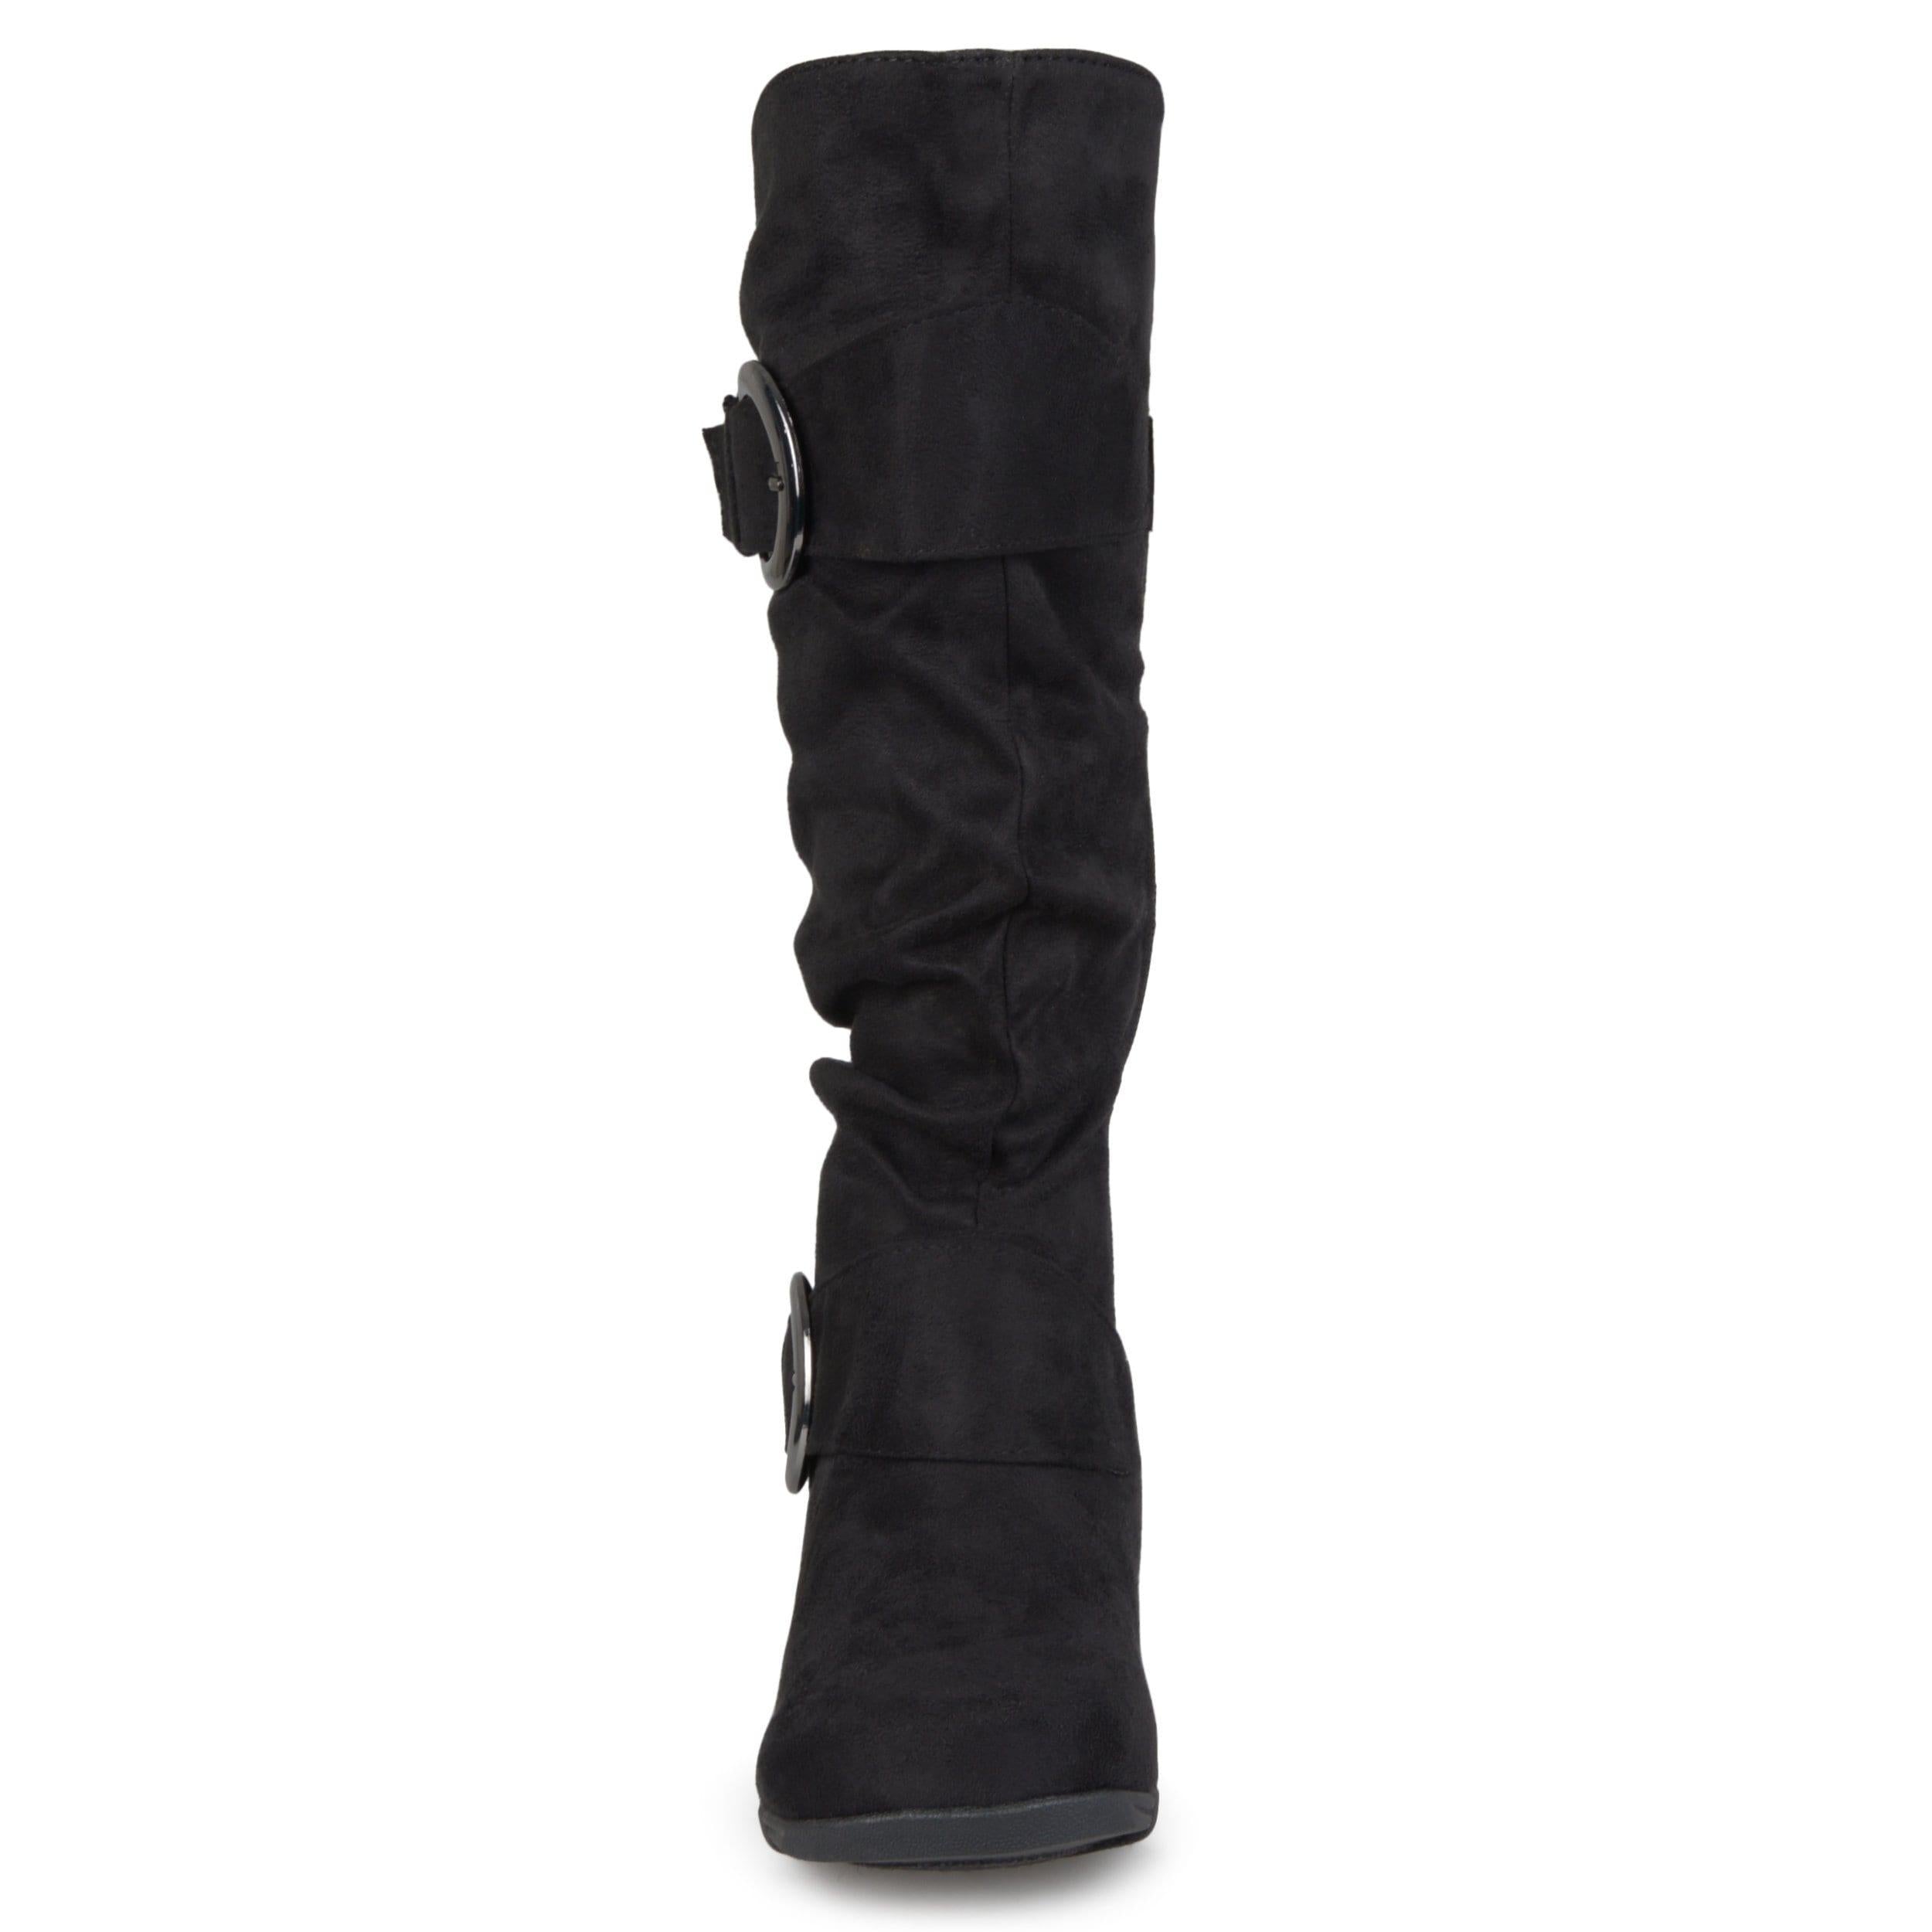 Jester Boots | Women's Knee High Boots | Journee Collection